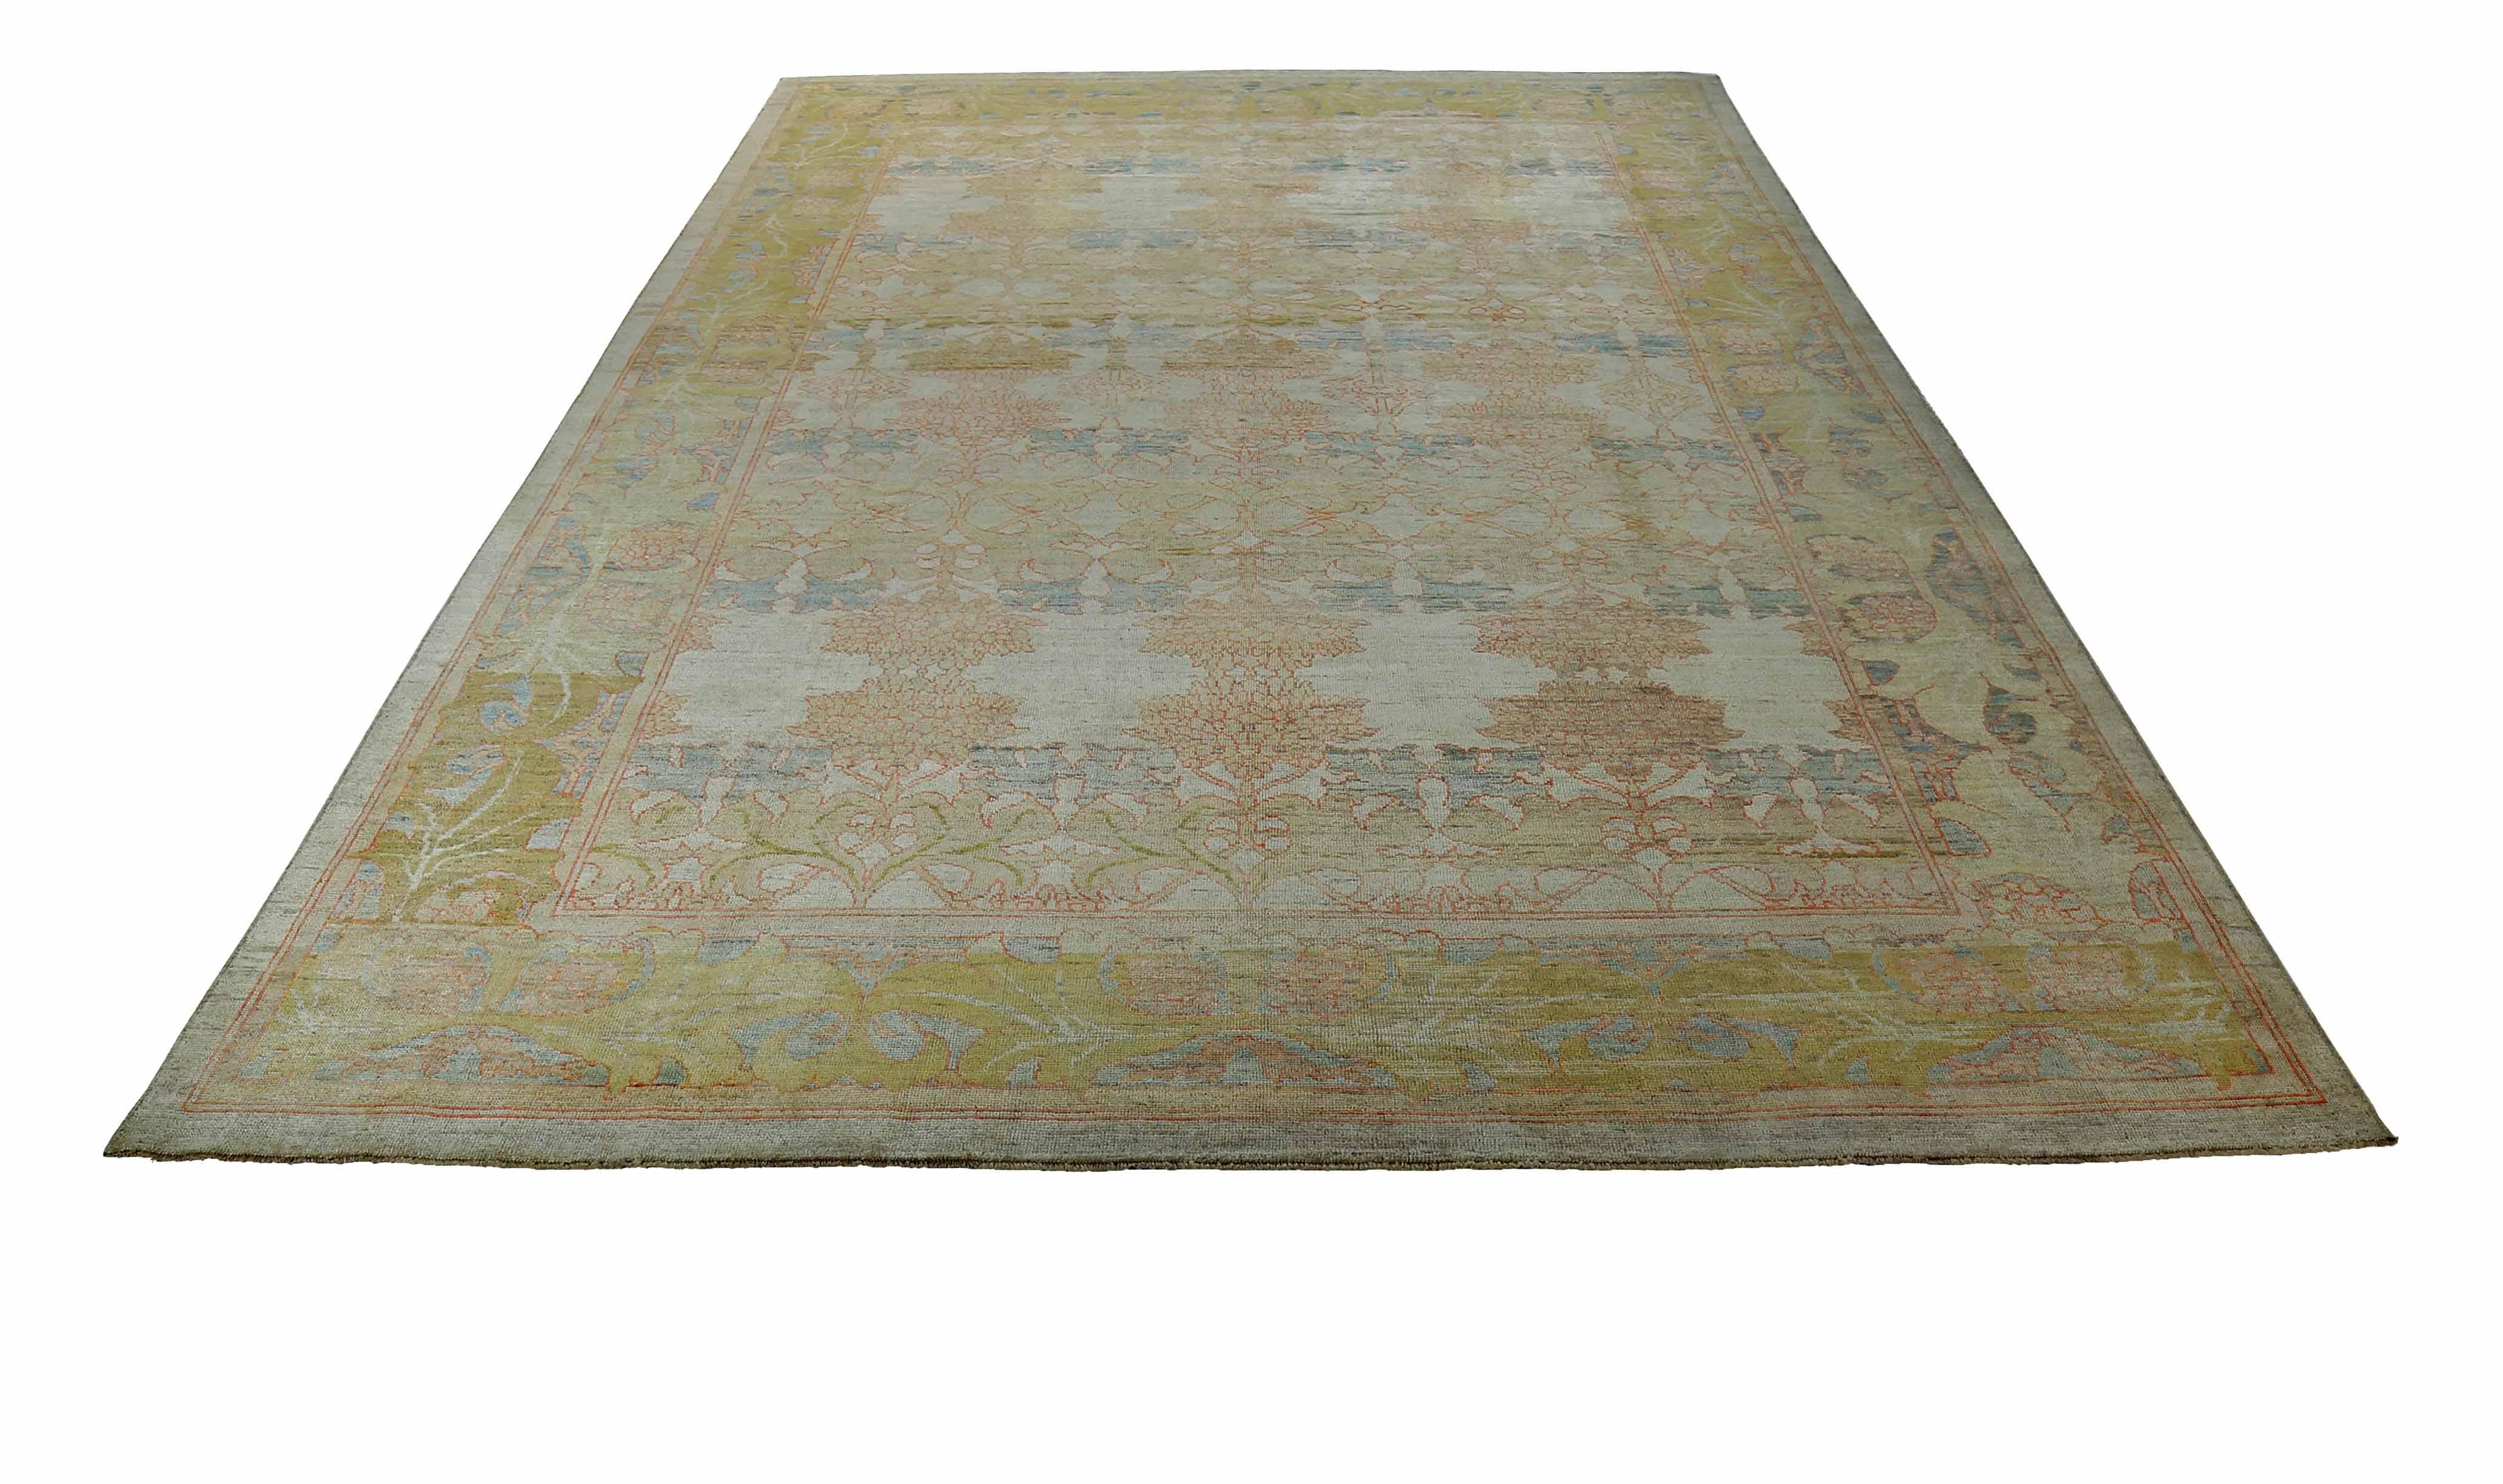 New Turkish rug made of handwoven sheep’s wool of the finest quality. It’s colored with organic vegetable dyes that are certified safe for humans and pets alike. It features yellow and green floral details on an elegant brown field. Flower patterns